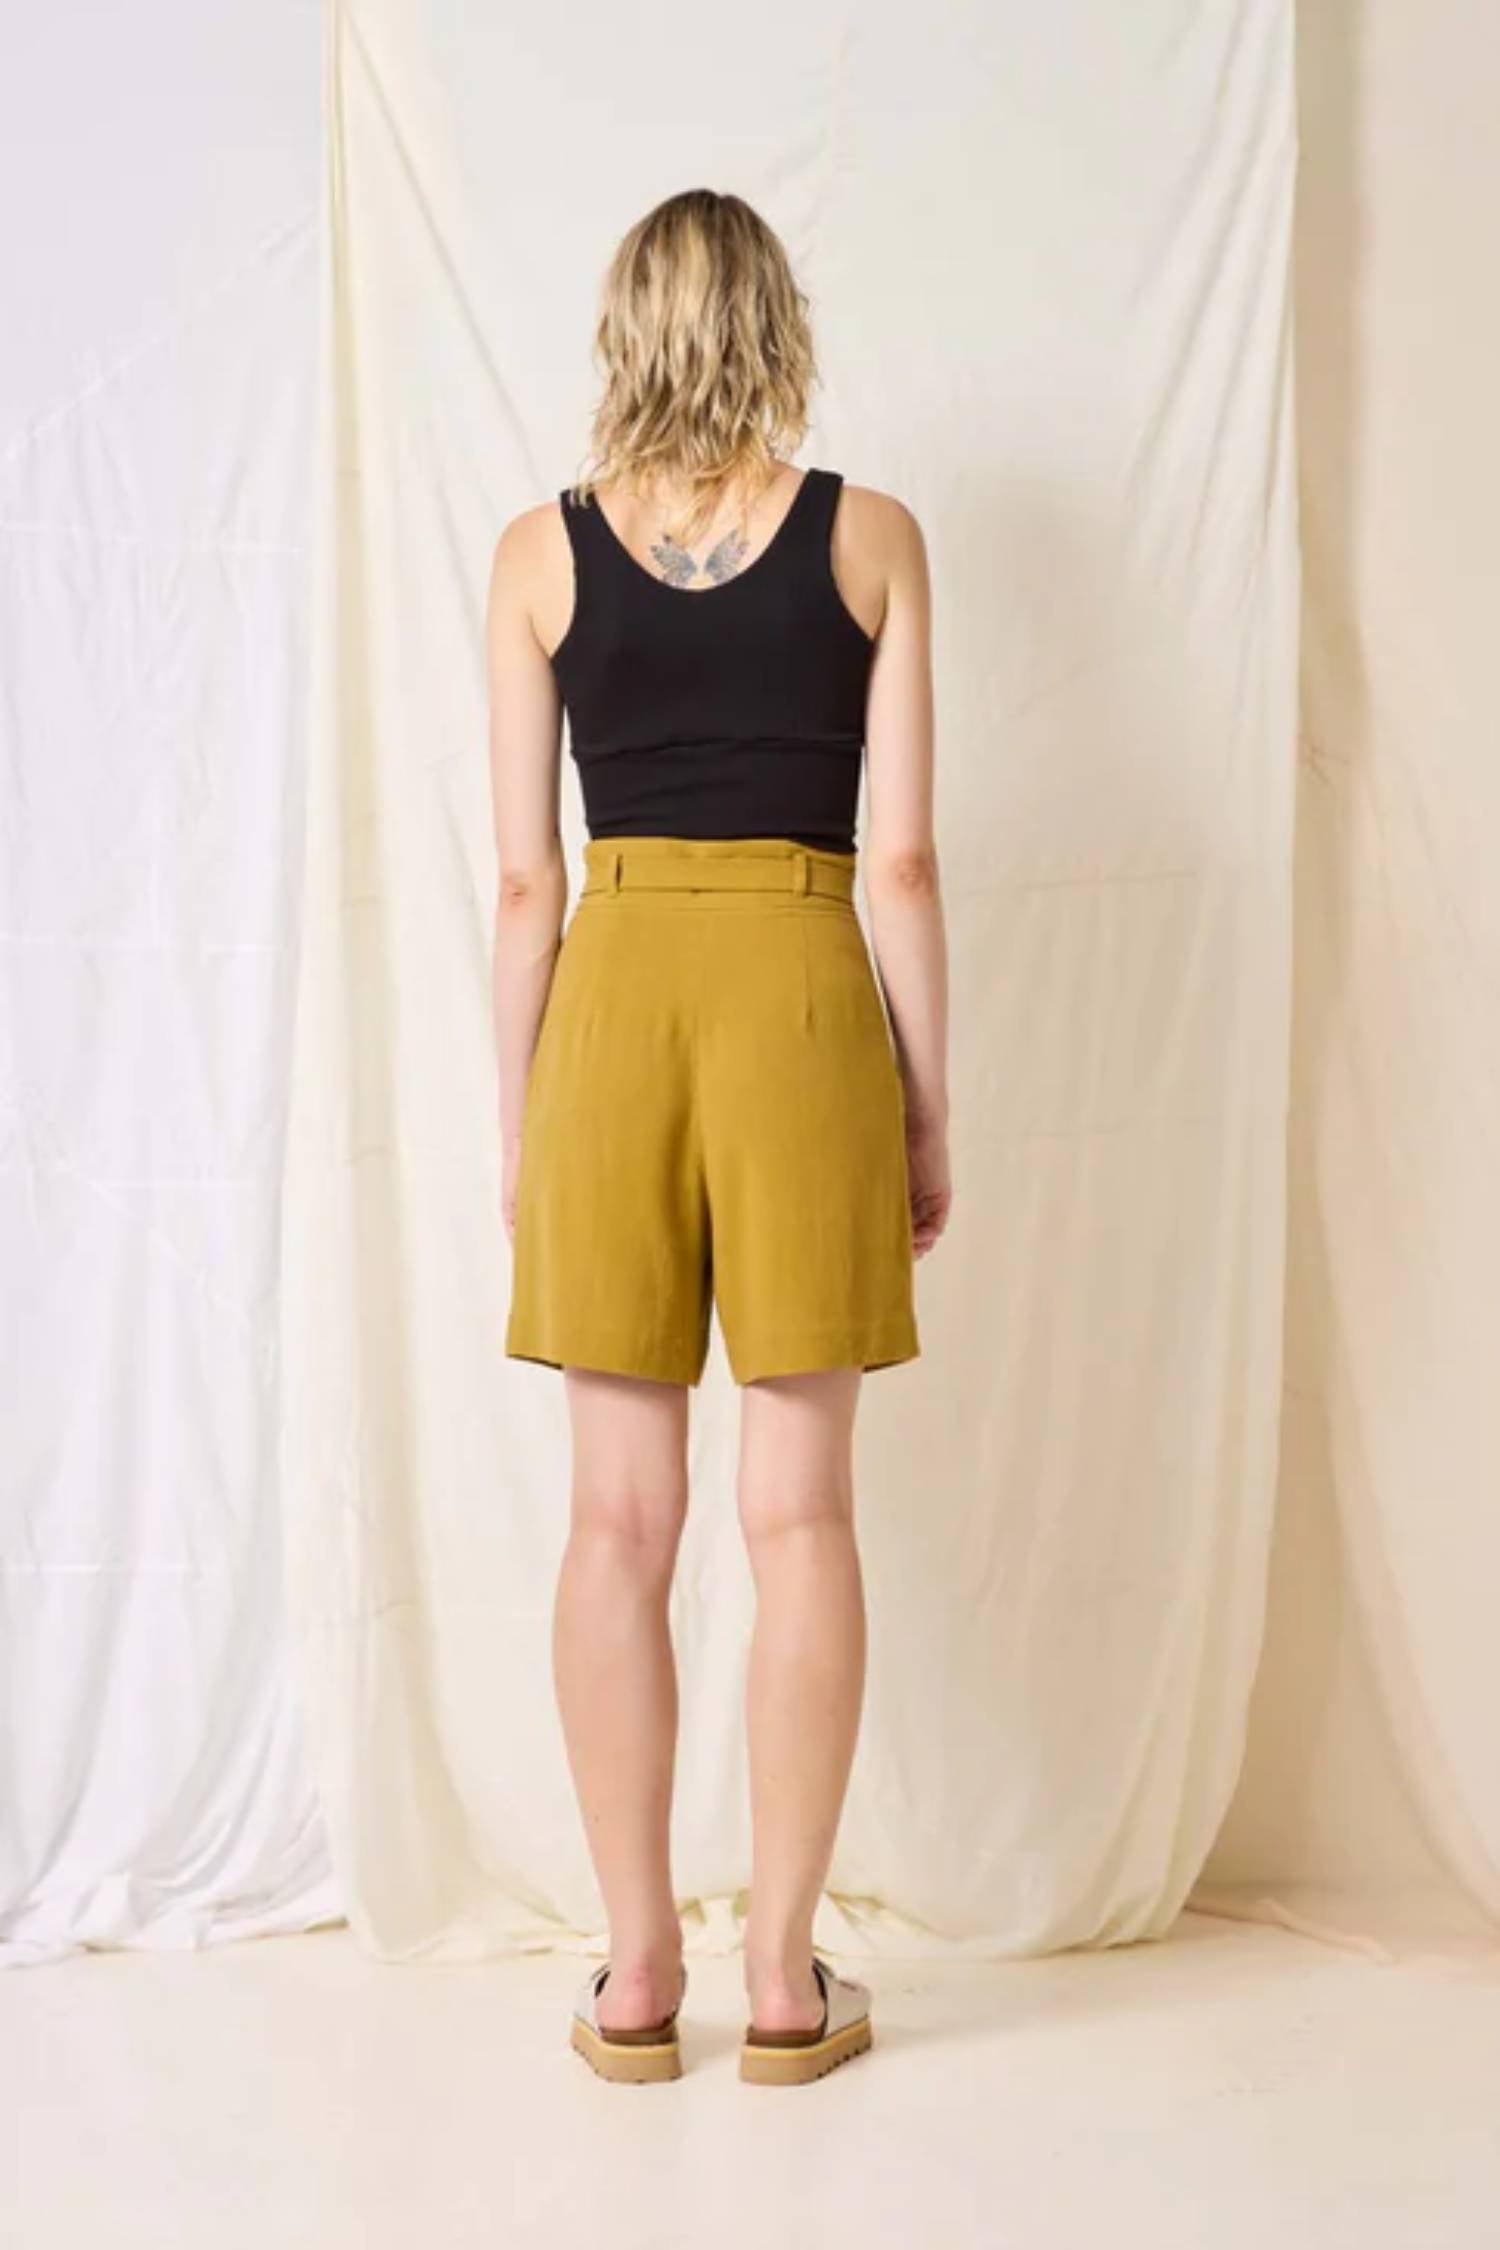 Kamala Short by Cokluch, Pistachio, back view, high waist, paper-bag effect, ring belt, front pleats, button closure at waist, pockets, eco-fabric, OEKO-TEX certified, sizes XS to XL, made in Montreal